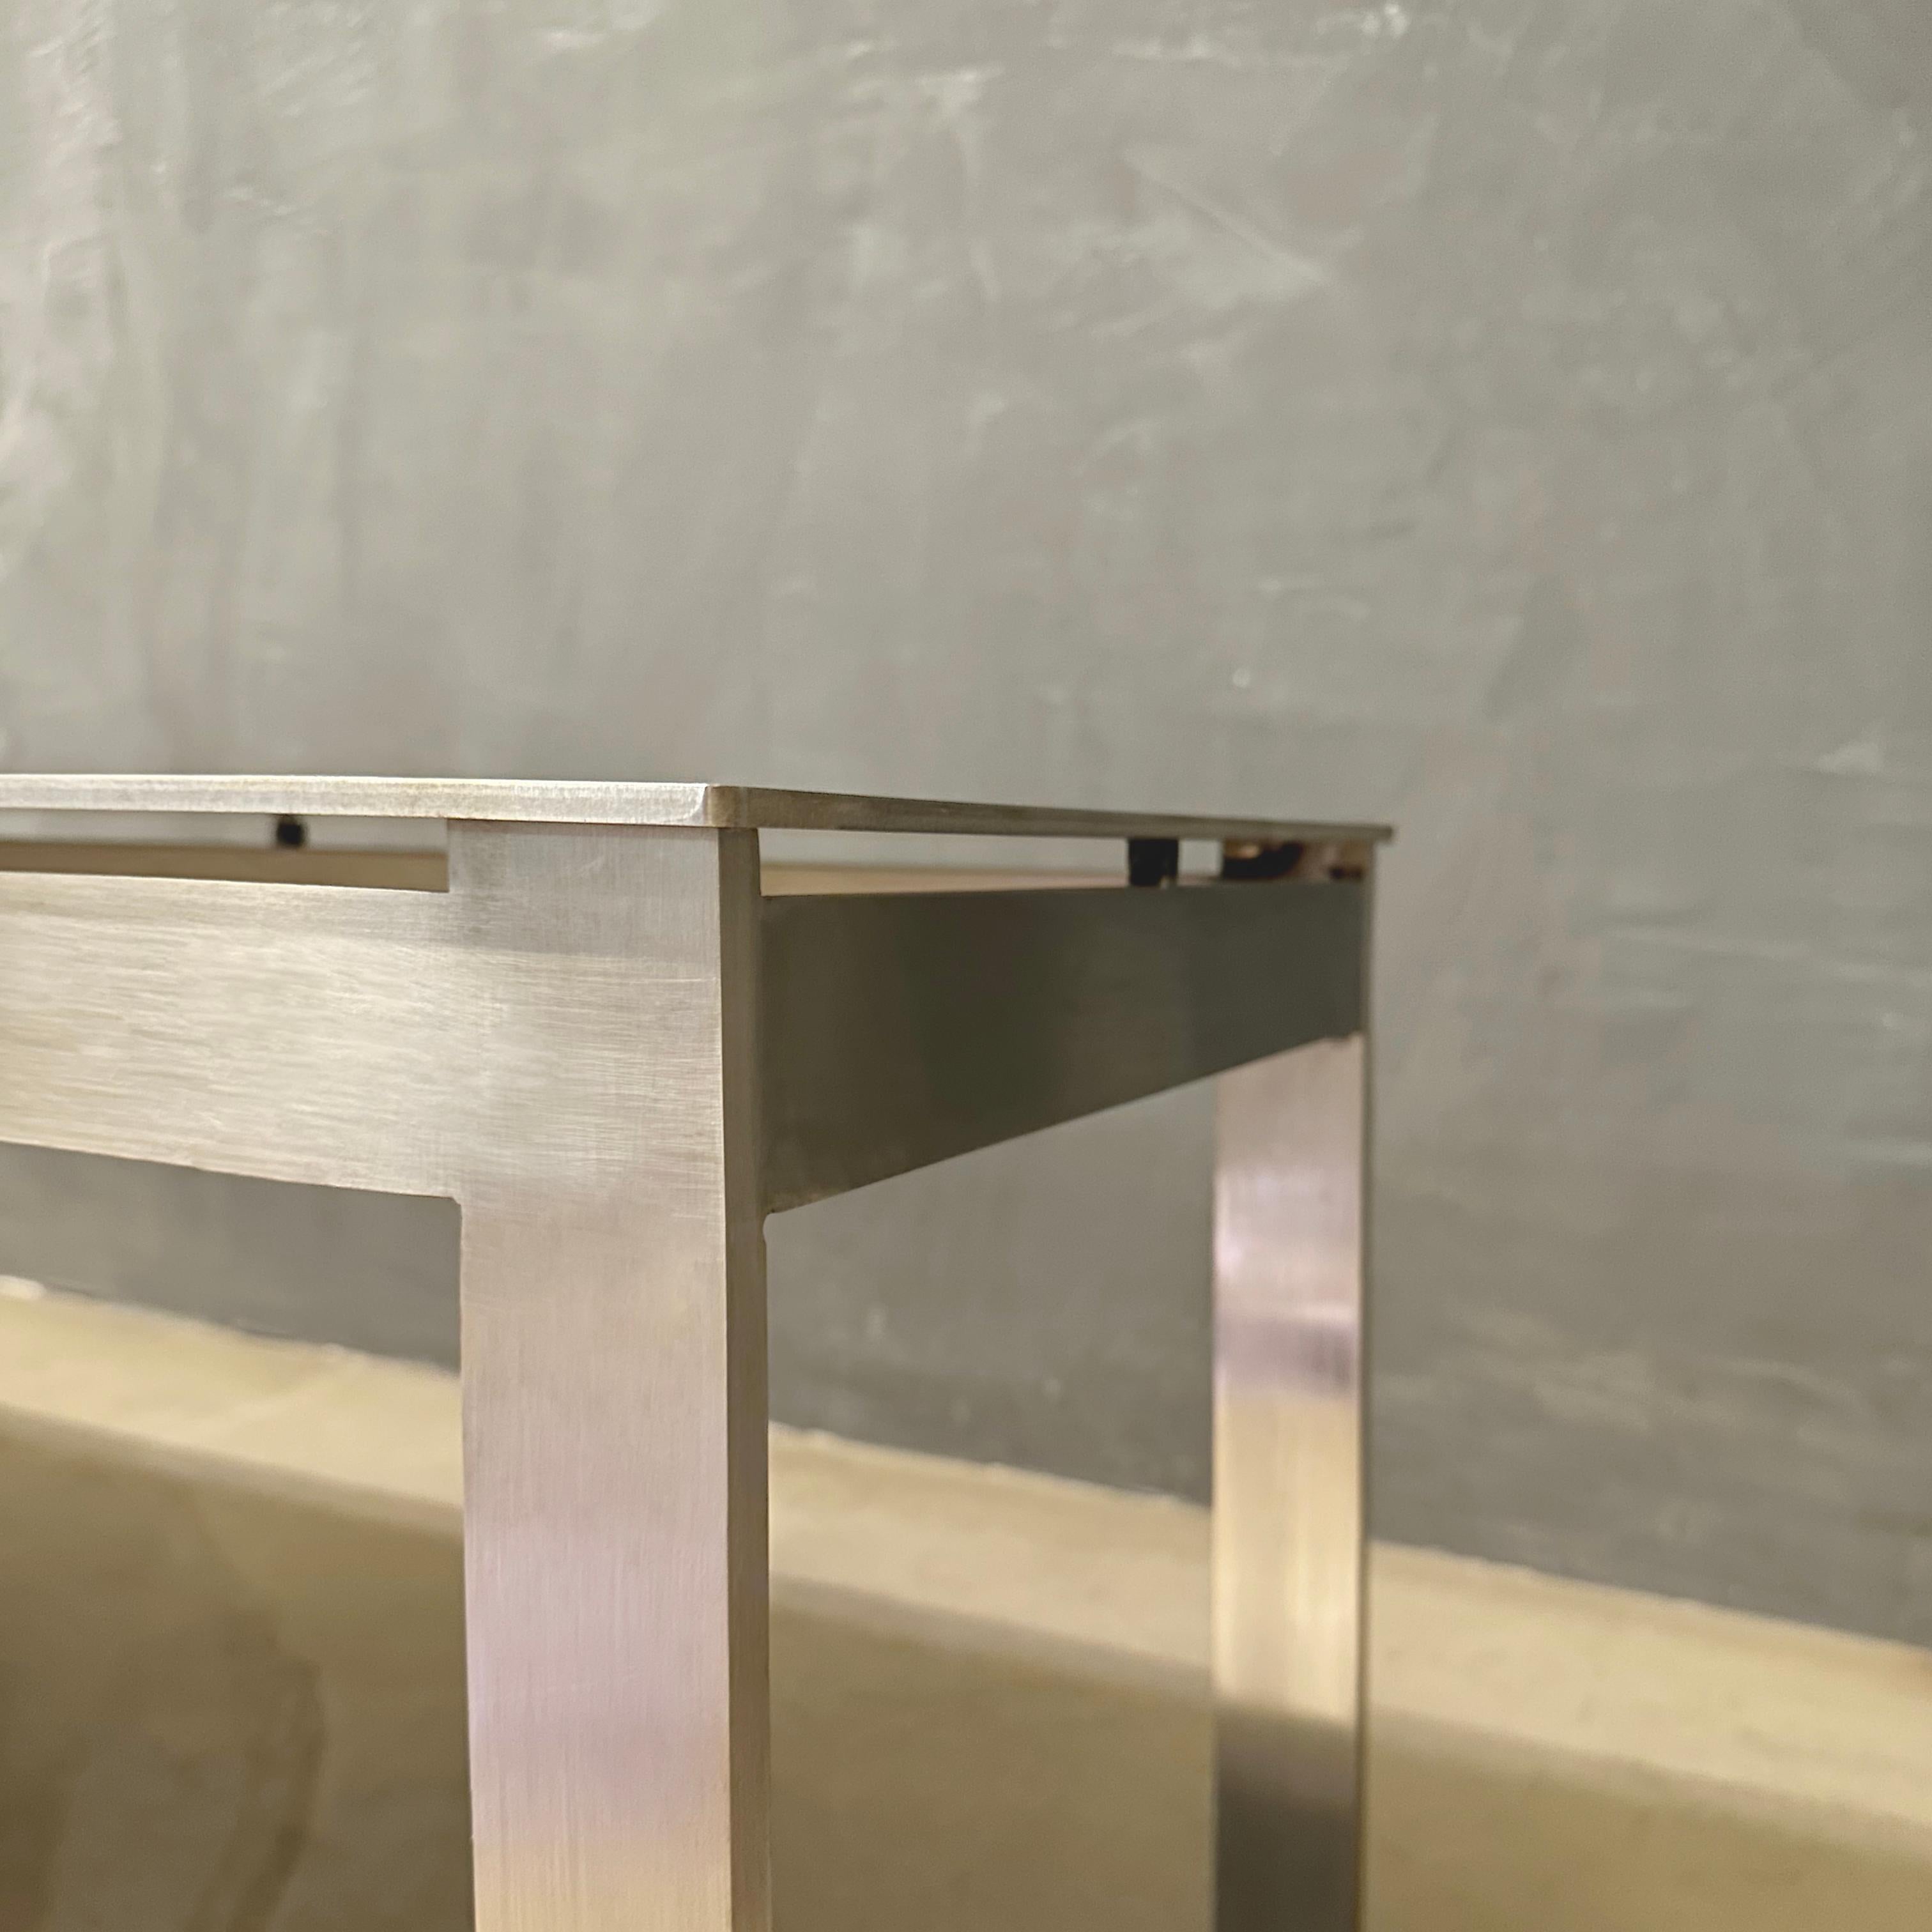 Brutalist “Big Iron” Bench, Iron, JAMES VINCENT MILANO, Italy, 2022 For Sale